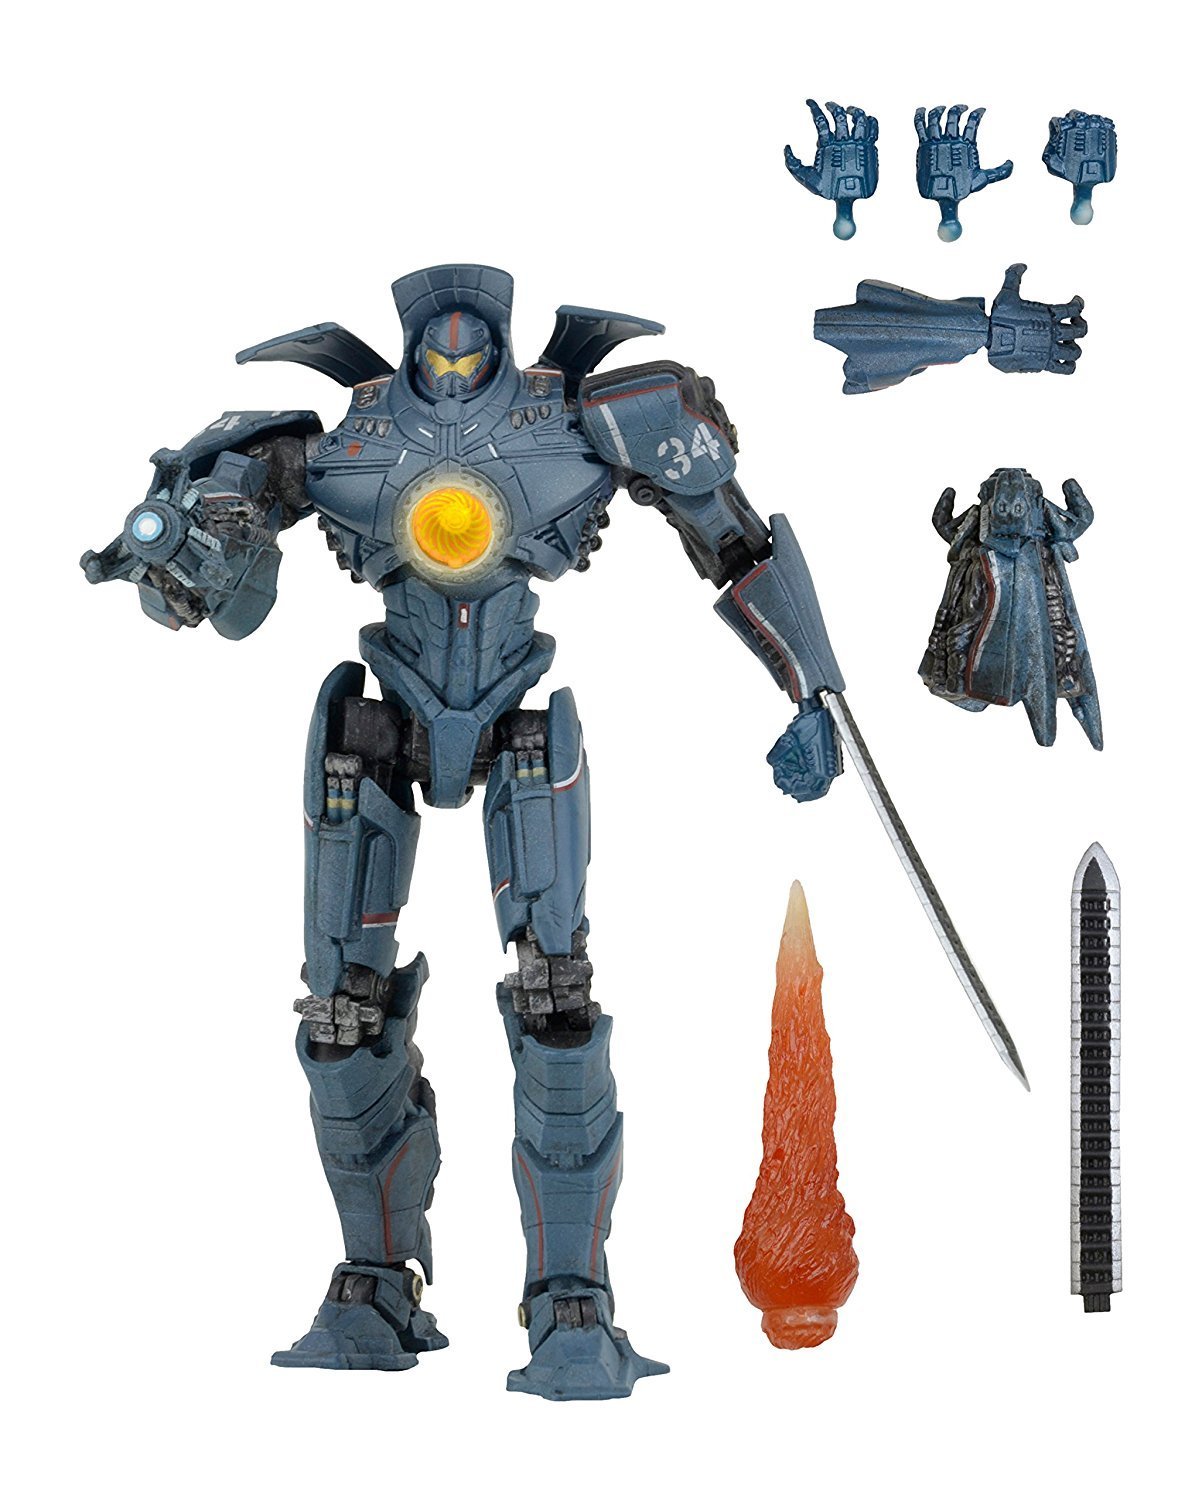 NECA Pacific Rim 7" Scale Ultimate Gipsy Danger Action Figure with LED Lights - Nerd Arena